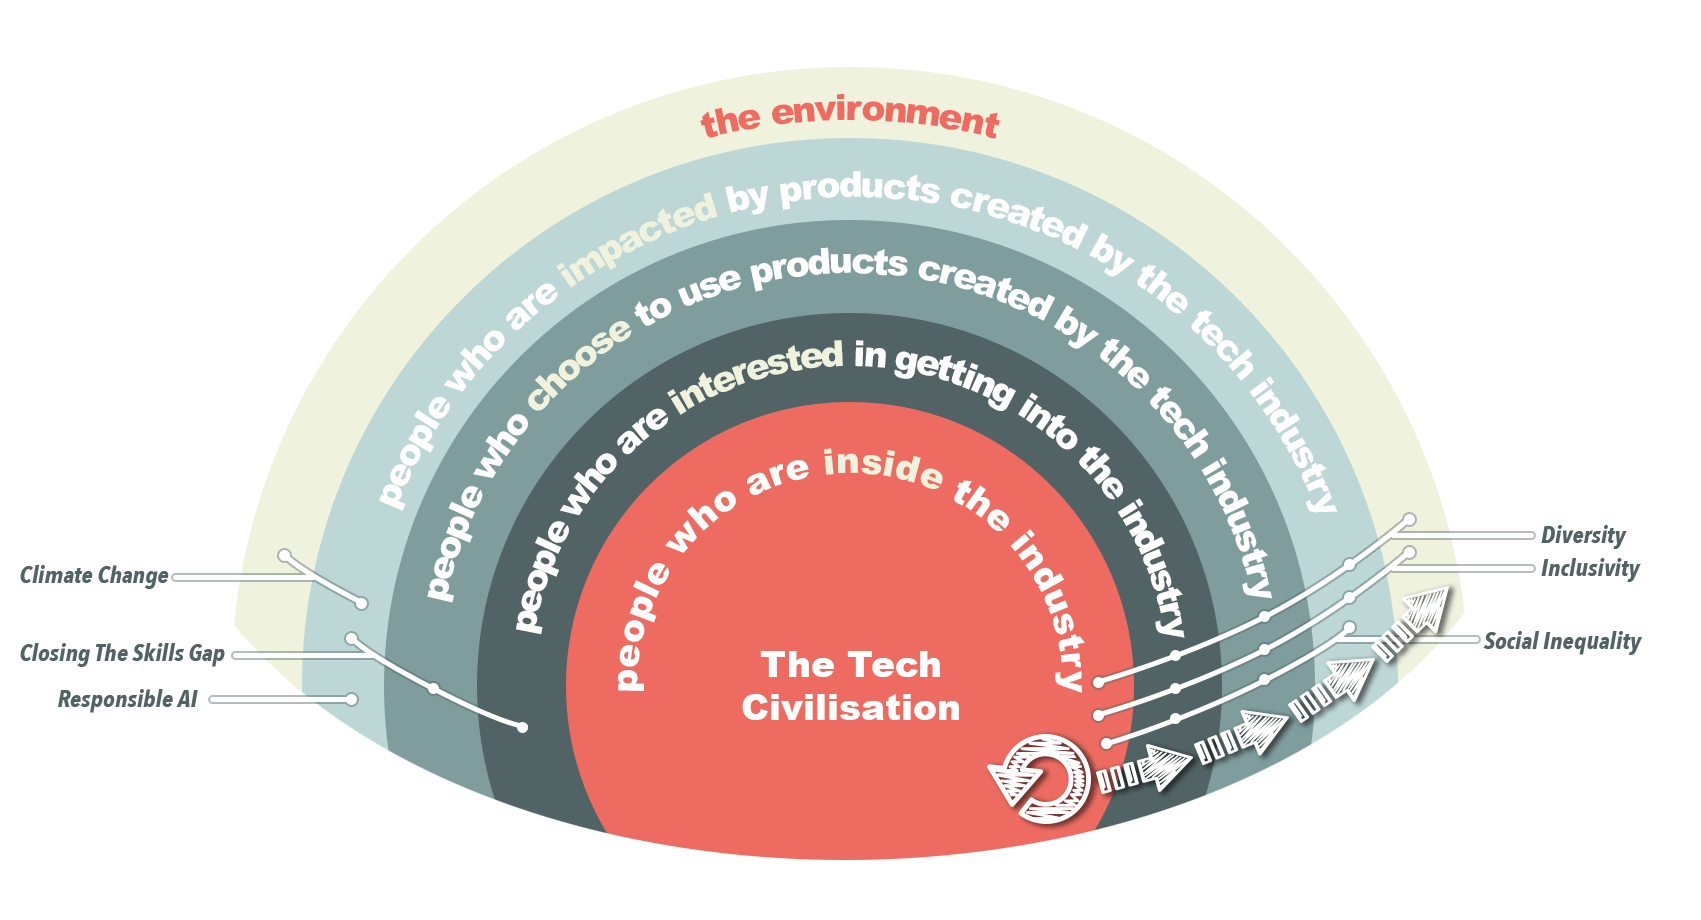 The Tech Civilisation's Circles of Influence